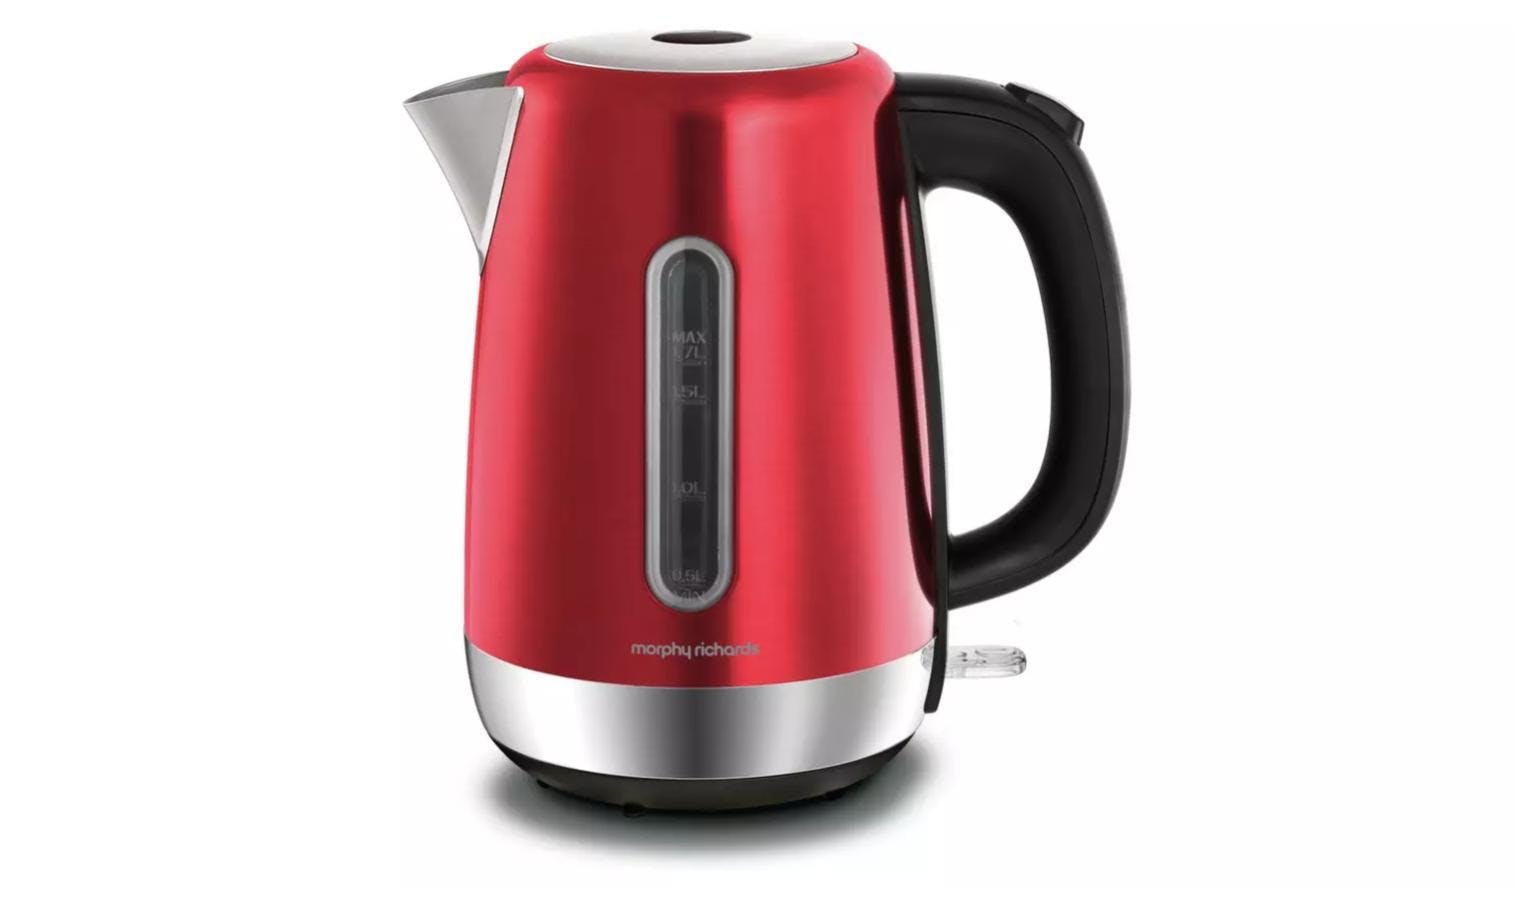 https://hnsgsfp.imgix.net/9/images/detailed/83/morphy.richards-1-7l-equip-stainless-steel-jug-kettle-102785-red_1.jpg?fit=fill&bg=0FFF&w=1534&h=900&auto=format,compress